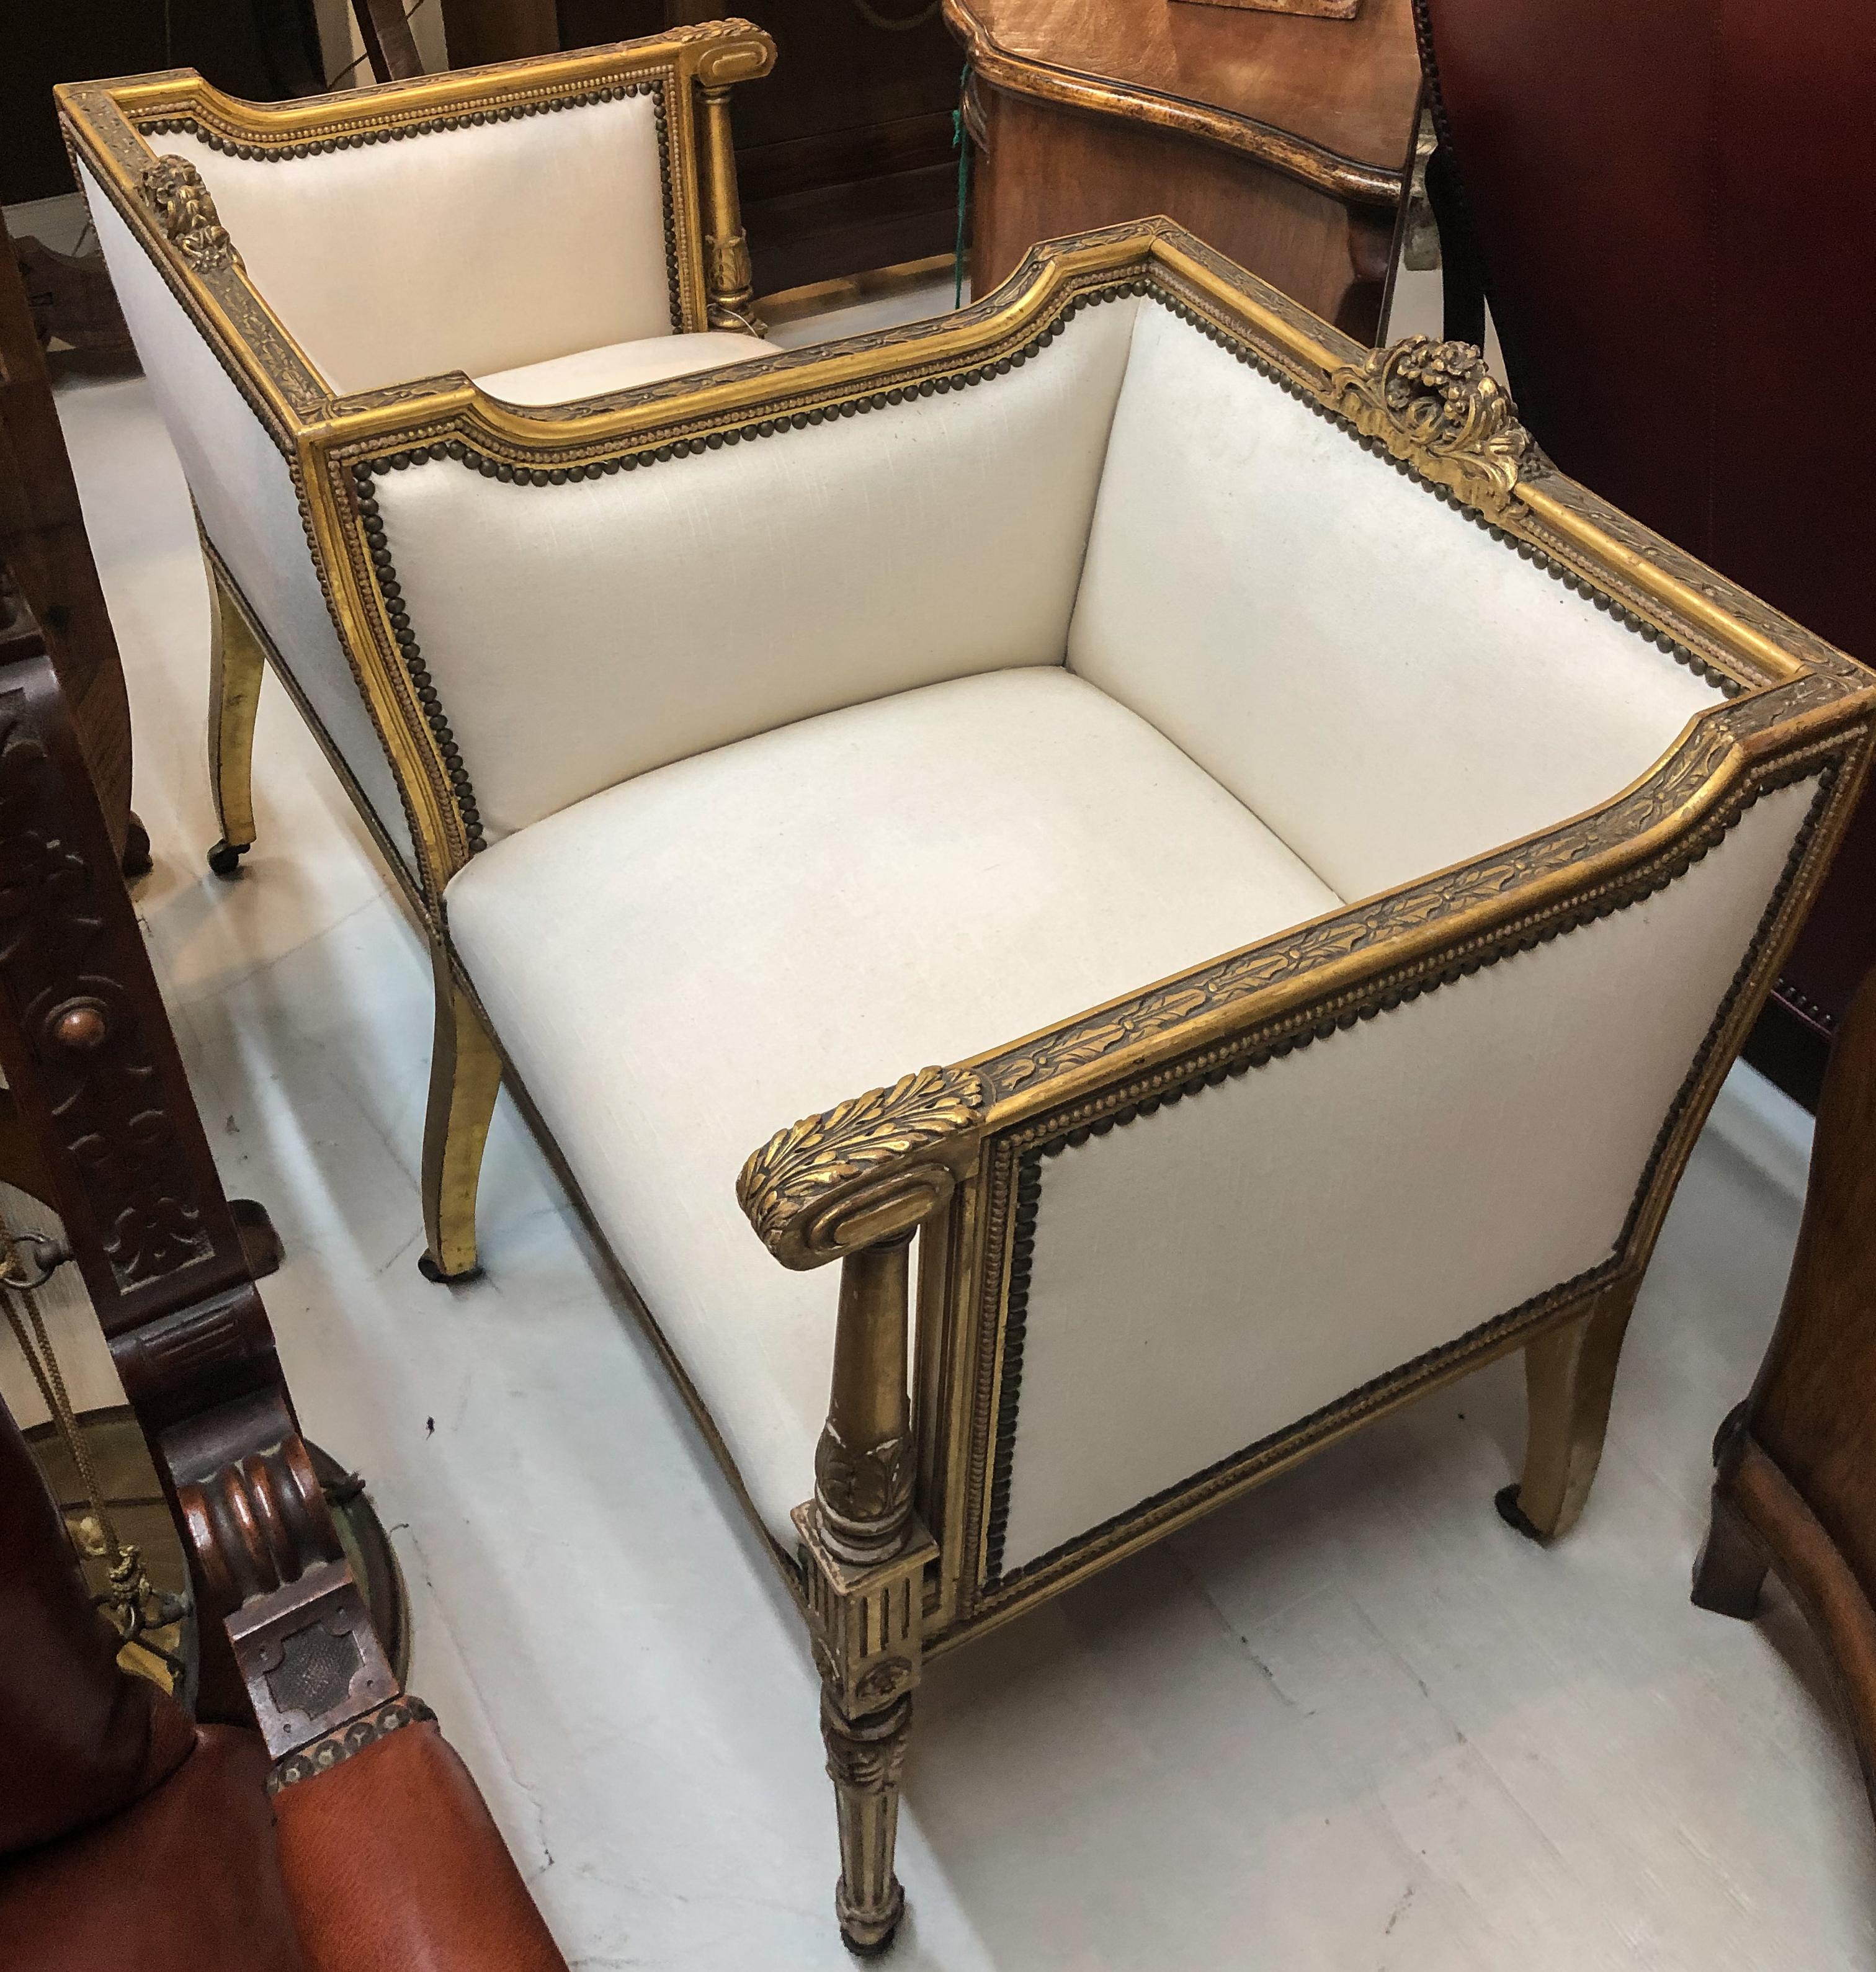 French Vis-a-Vis giltwood chair from the 19th century in ivory linen with carved wood details.